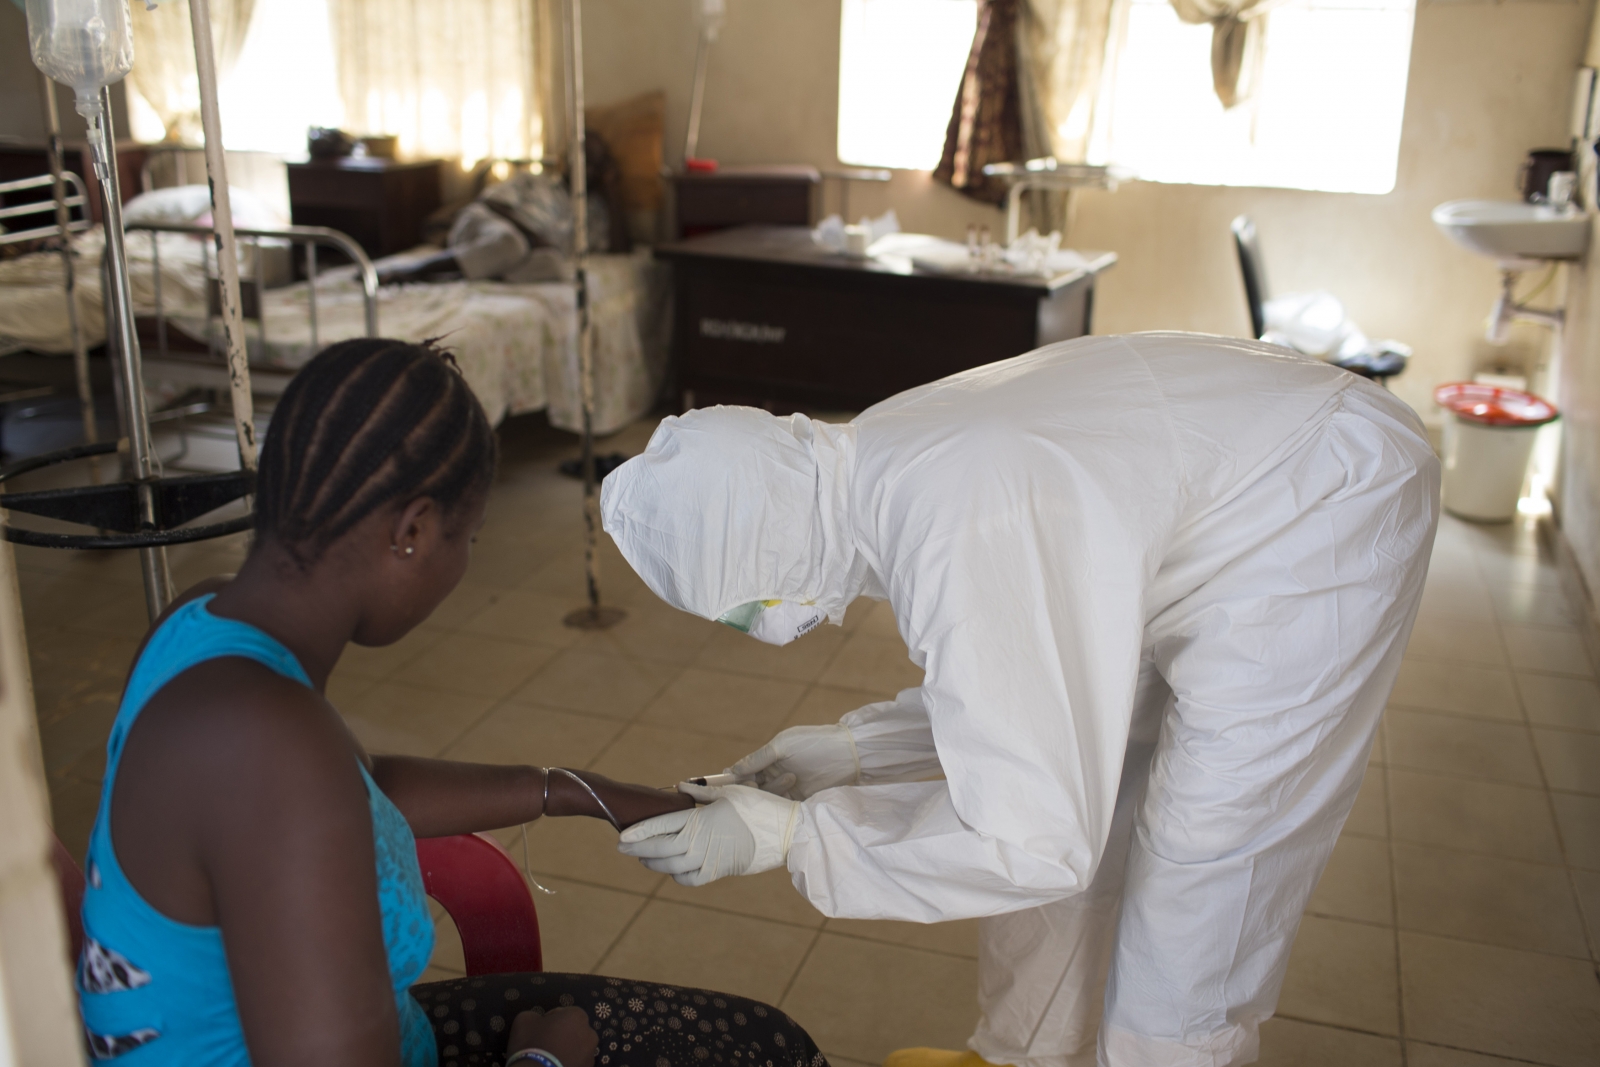 Ebola: 44 Million People 'Affected by 219 Infectious Diseases in Last 30 Years'1600 x 1067